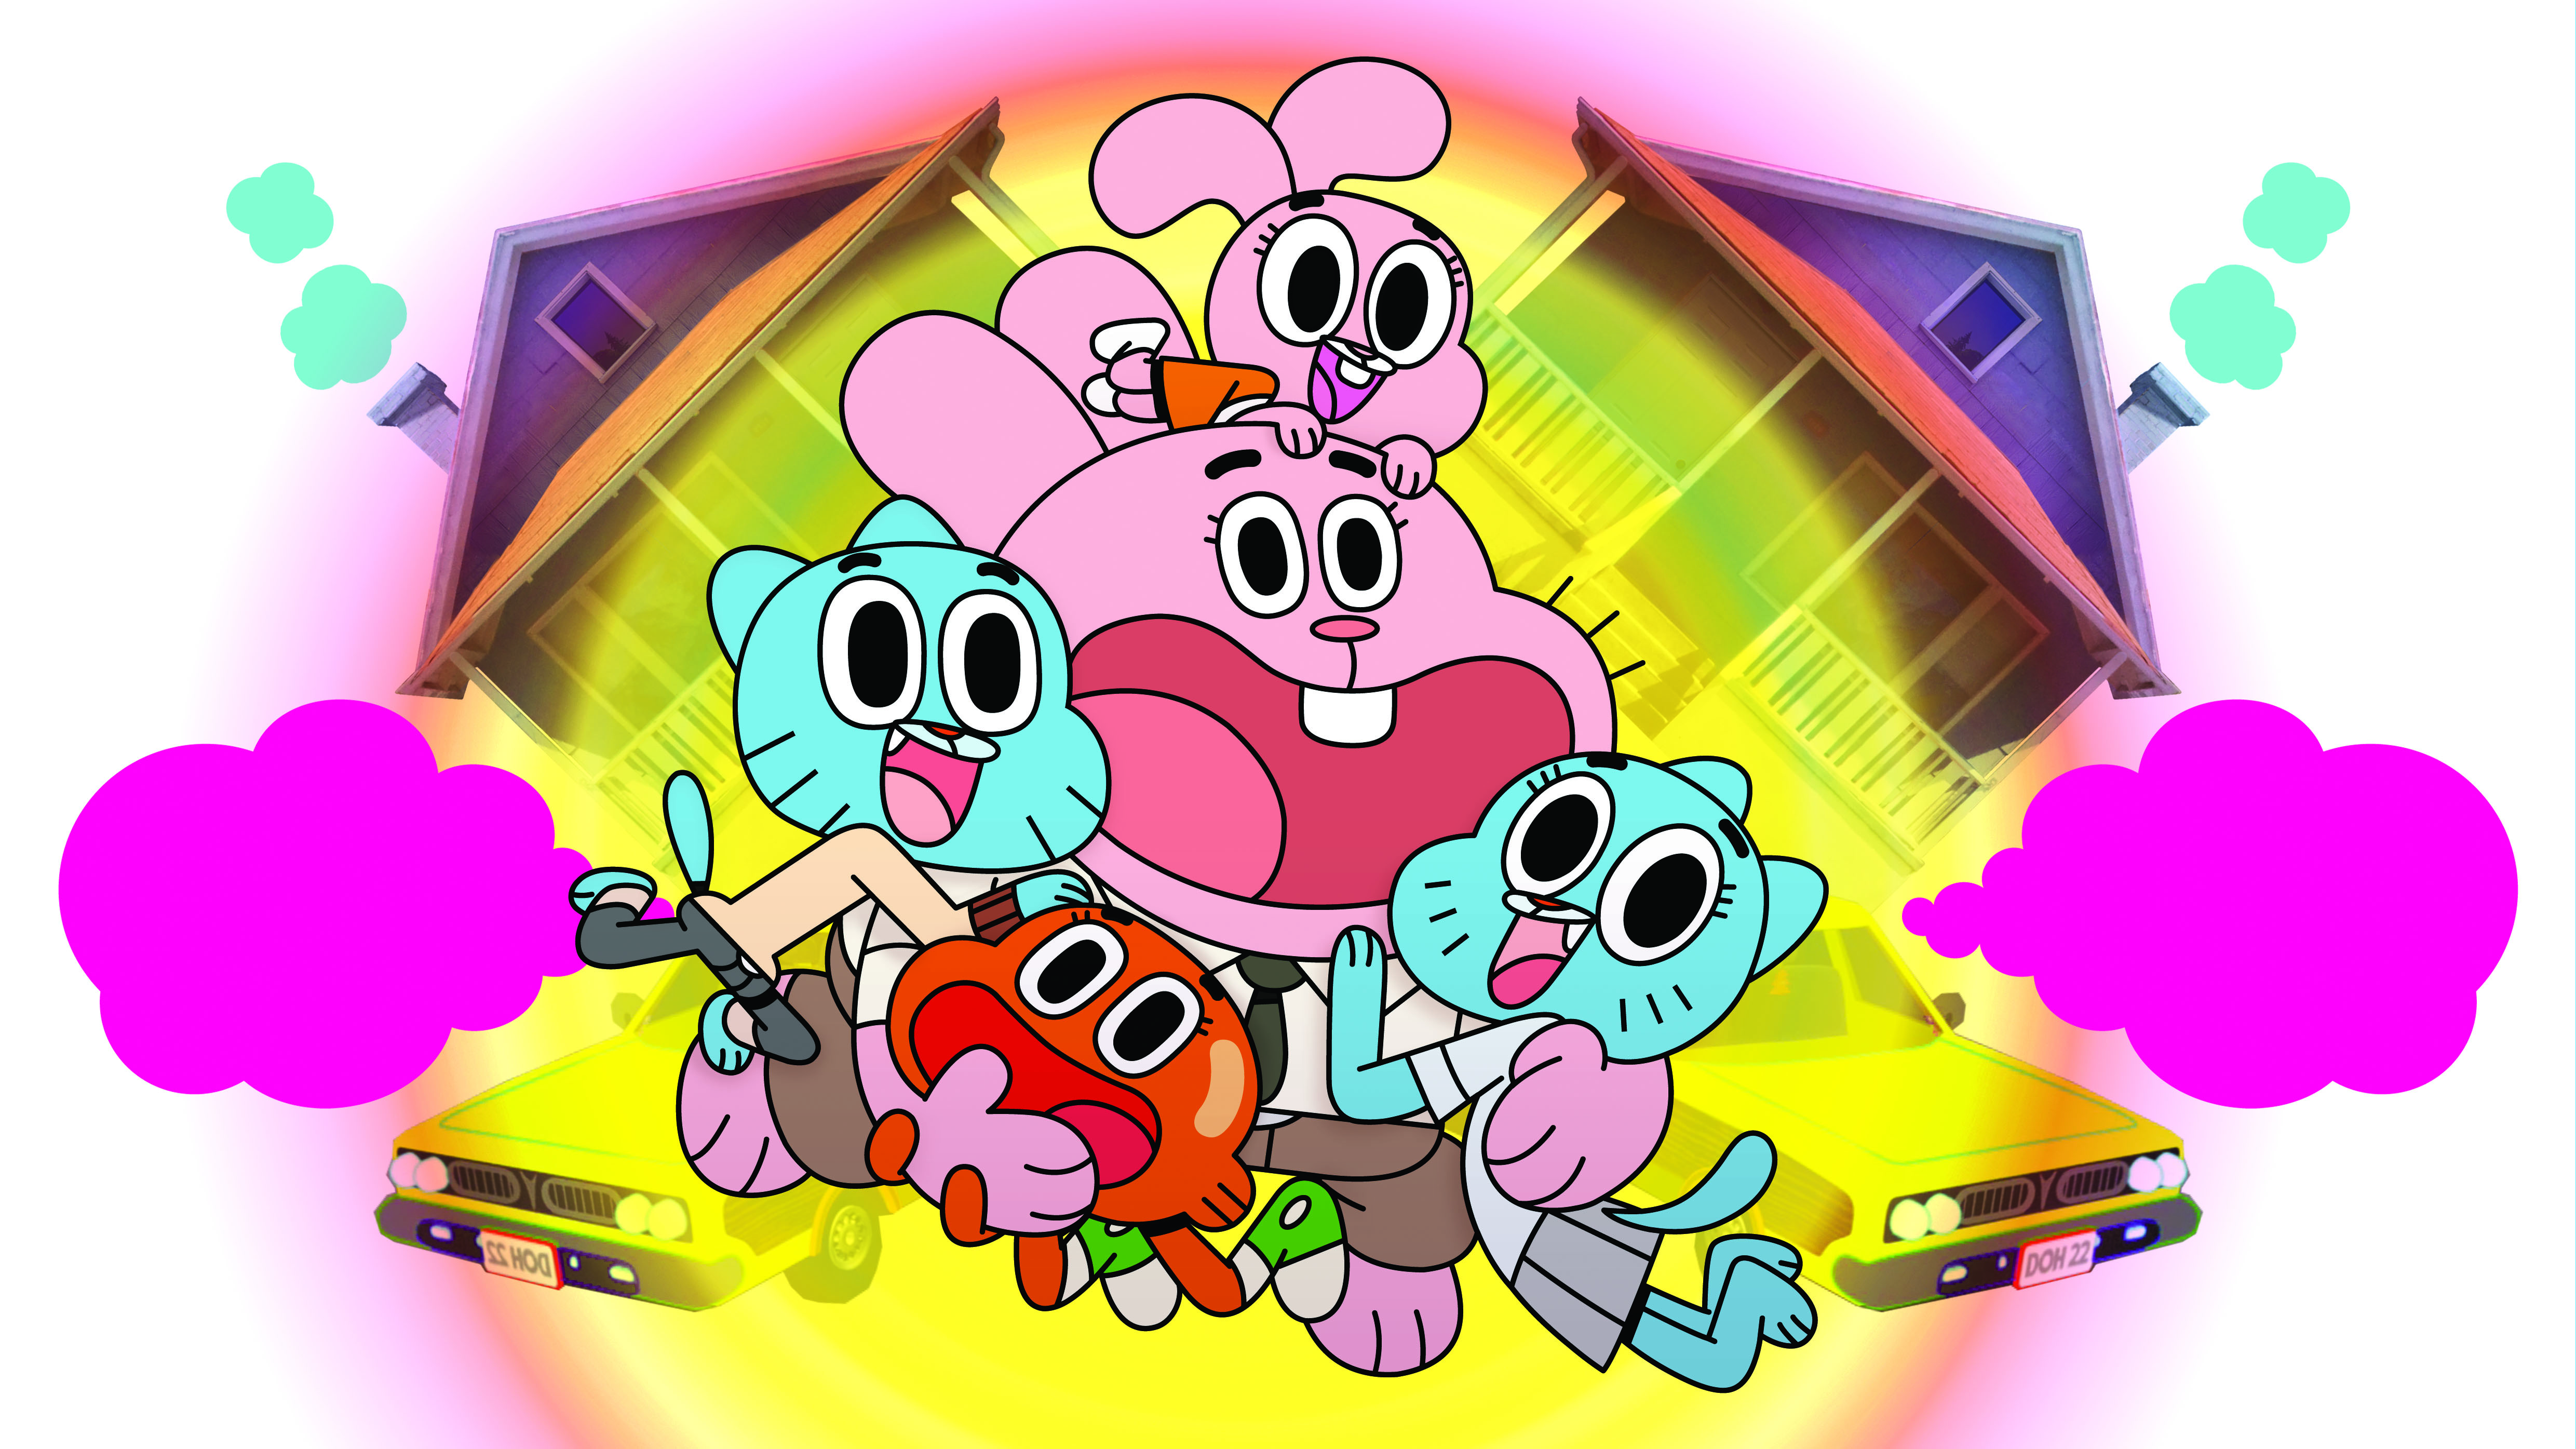 Gumball Begins Reign of Color